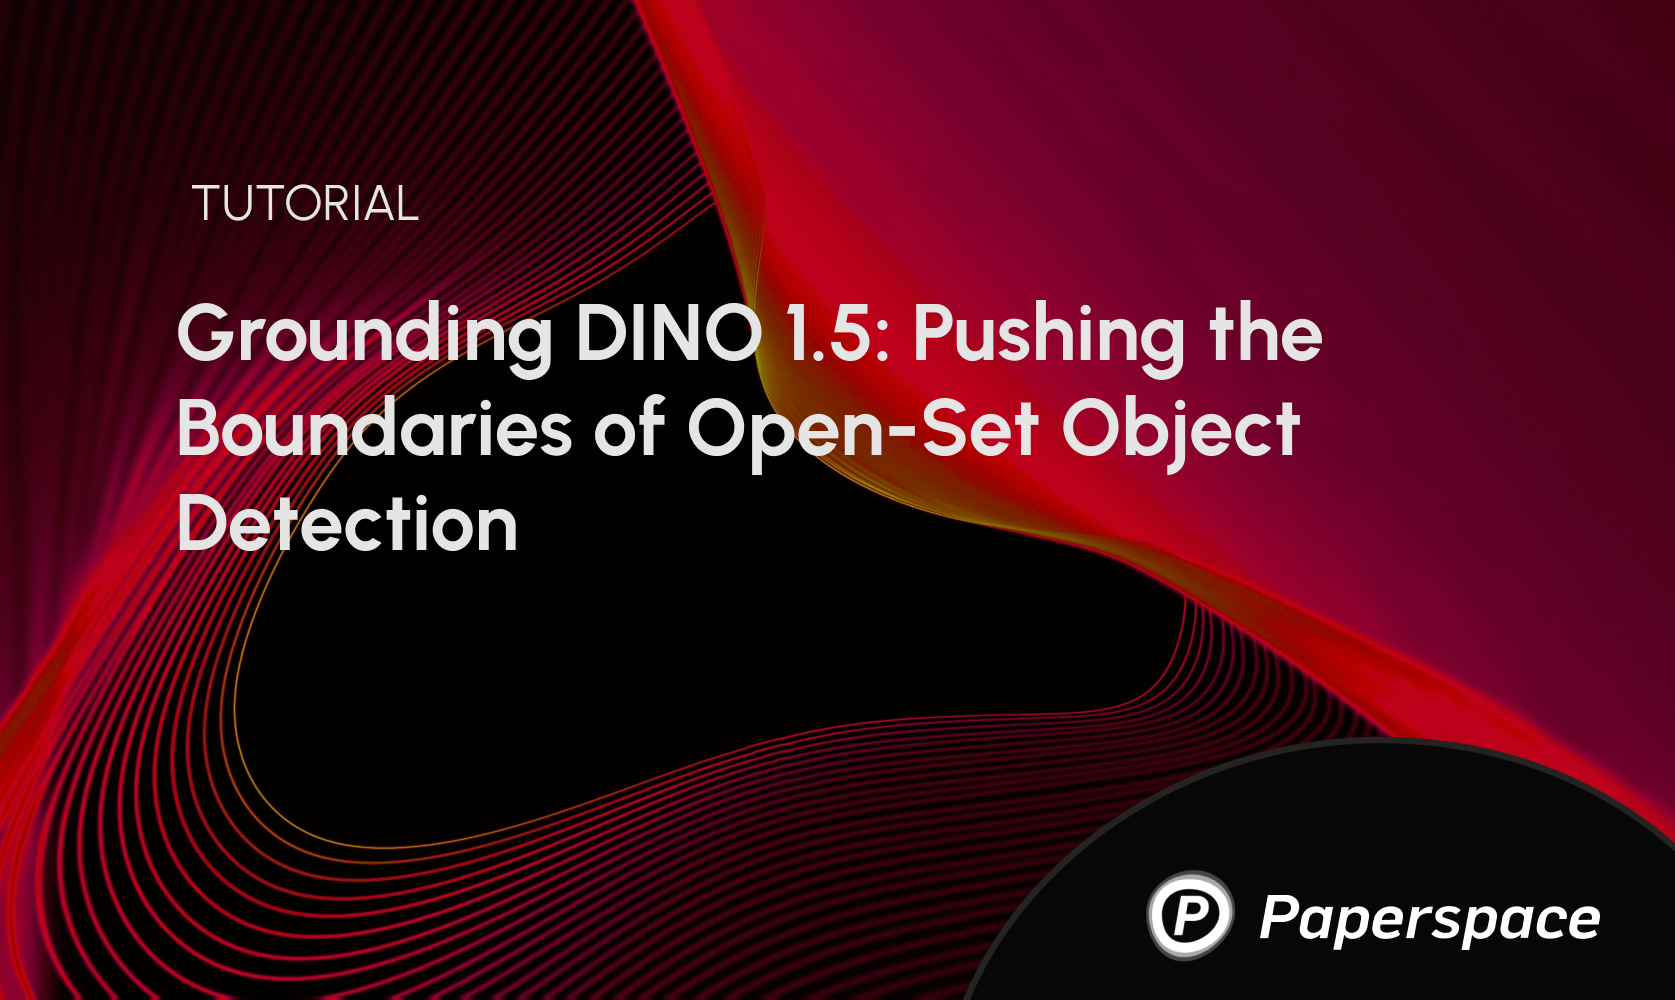 Grounding DINO 1.5: Pushing the Boundaries of Open-Set Object Detection